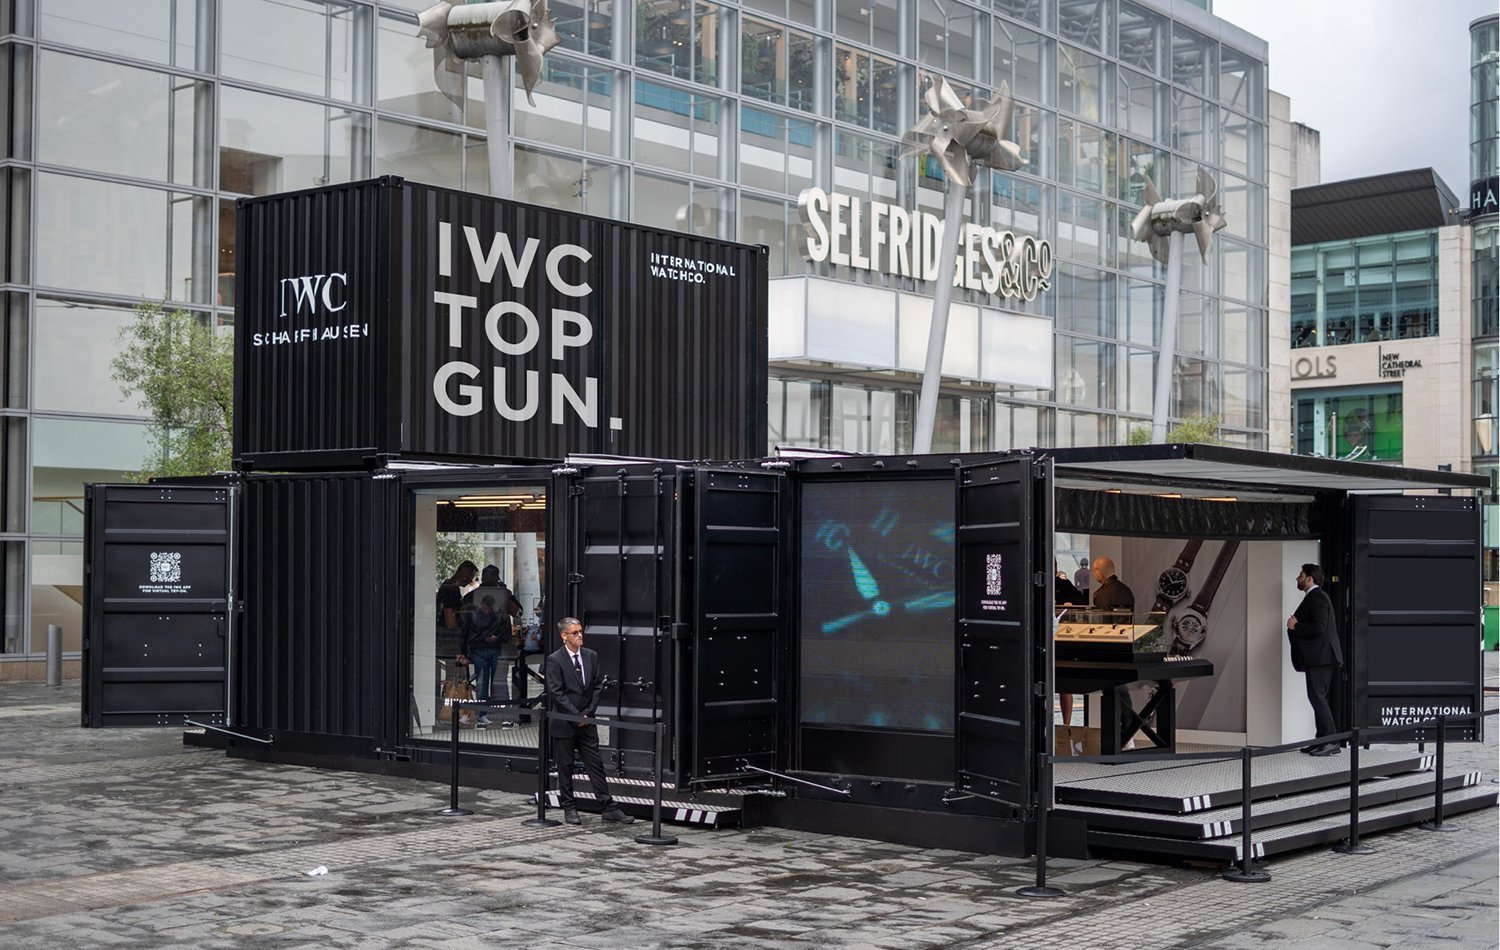 IWC On Tour: TOP GUN Roadshow comes to Manchester